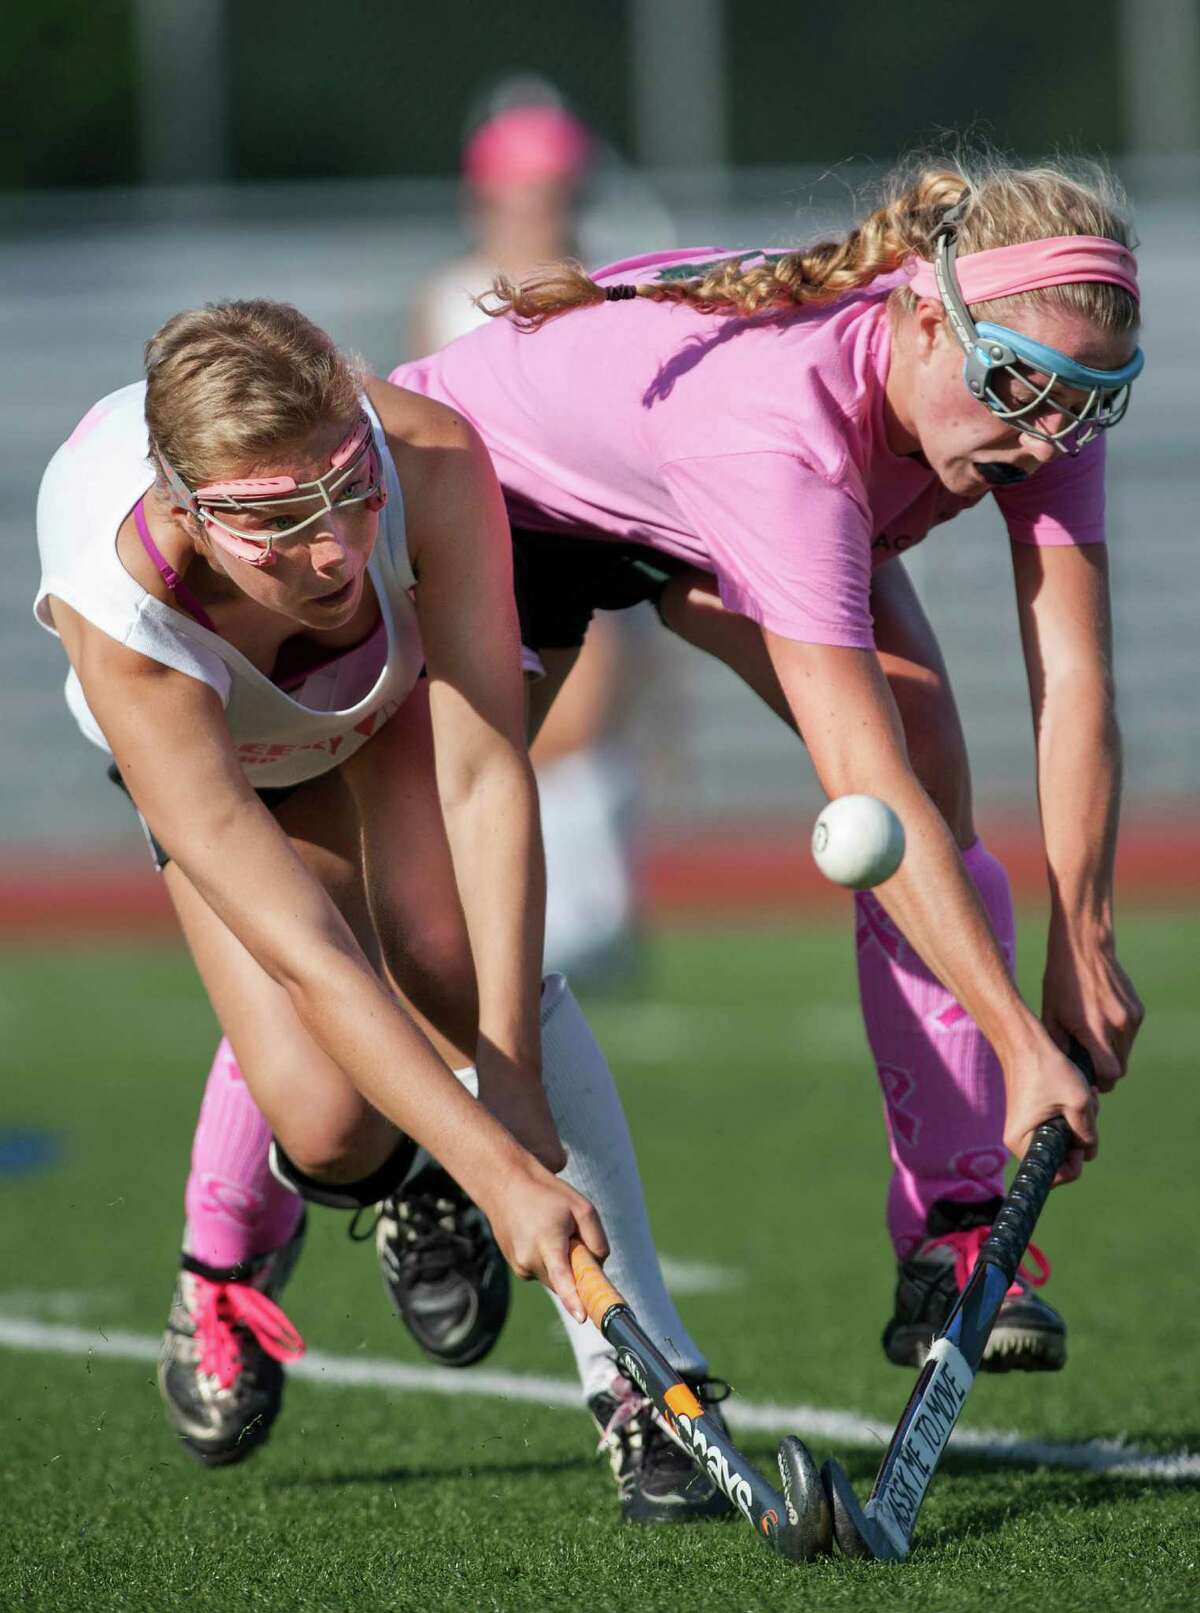 Greenwich high school's Nicole Graham and Greenwich Academy's Katrina Kraus fight for the ball during a girls field hockey game played at Greenwich high school, Greenwich, CT on Monday September 9th, 2013.